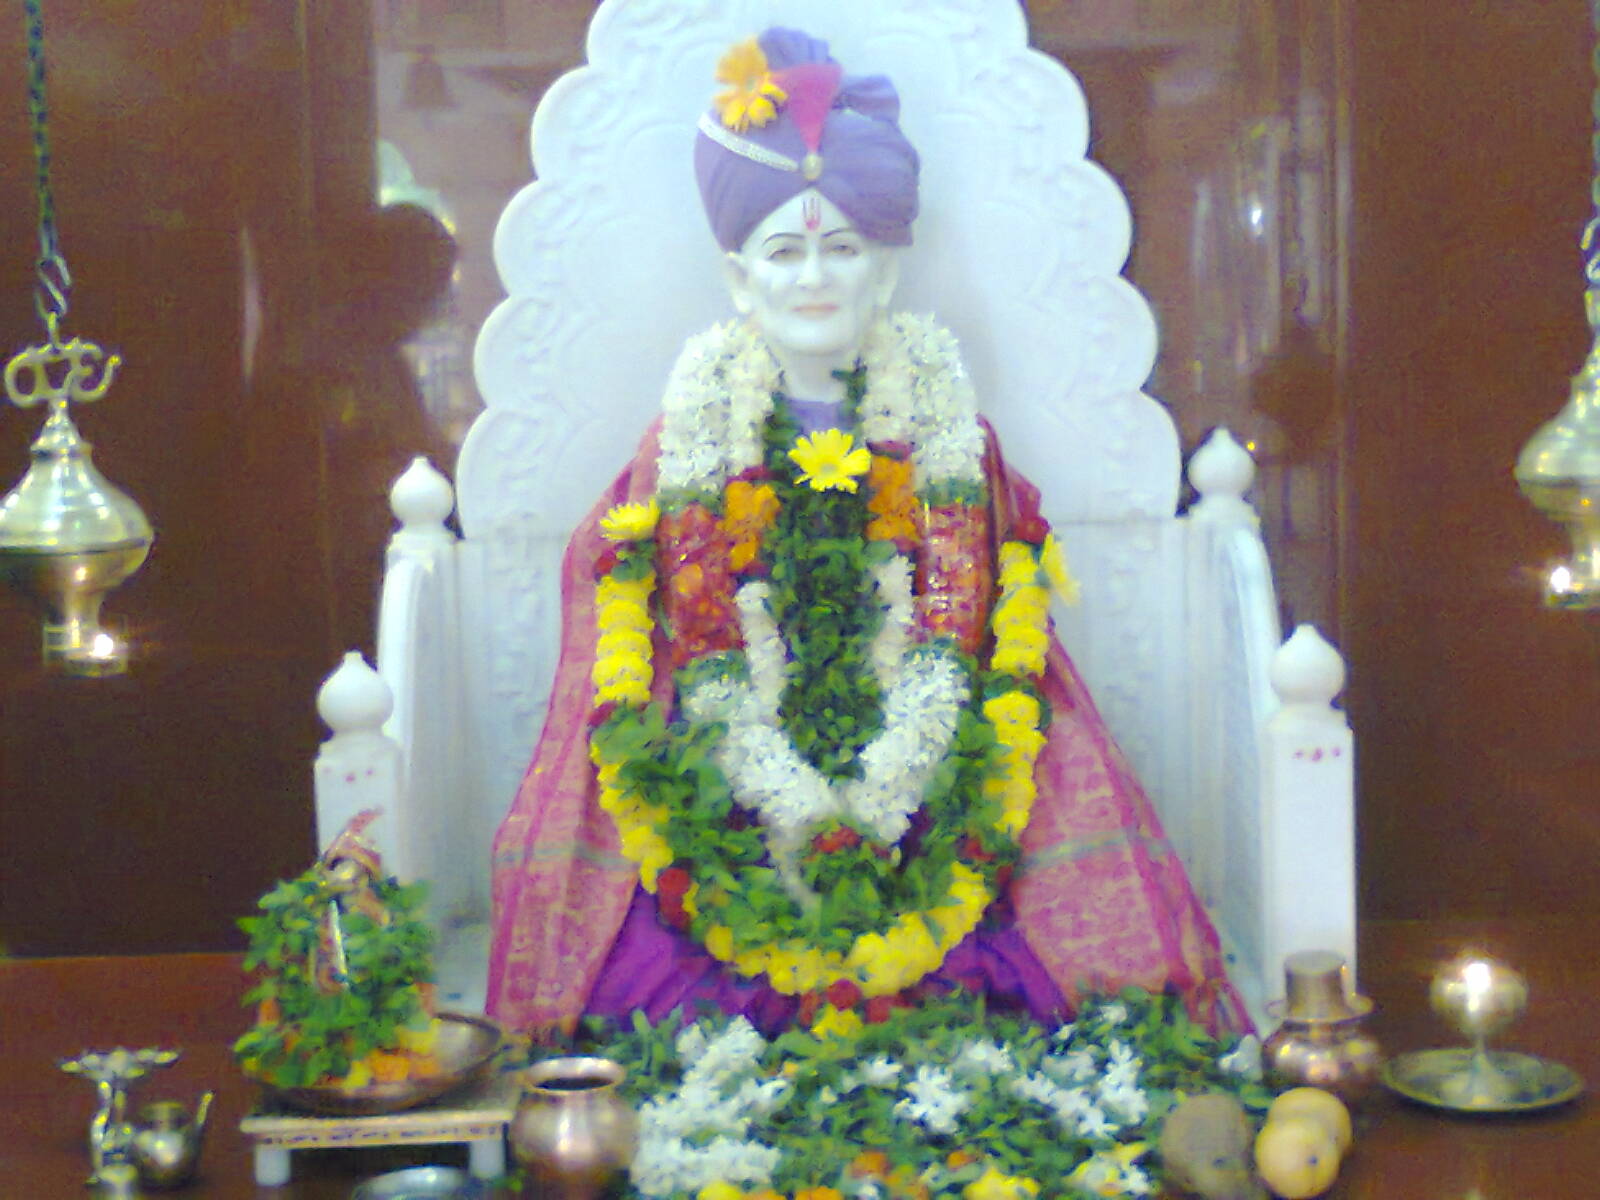 Shree Gajanan Maharaj Trust Online Darshan Of Shree Gajanan Maharaj Math Margao Goa Gajanan Maharaj Margao About Maharaj Visitor Submitted Donation How To Reach